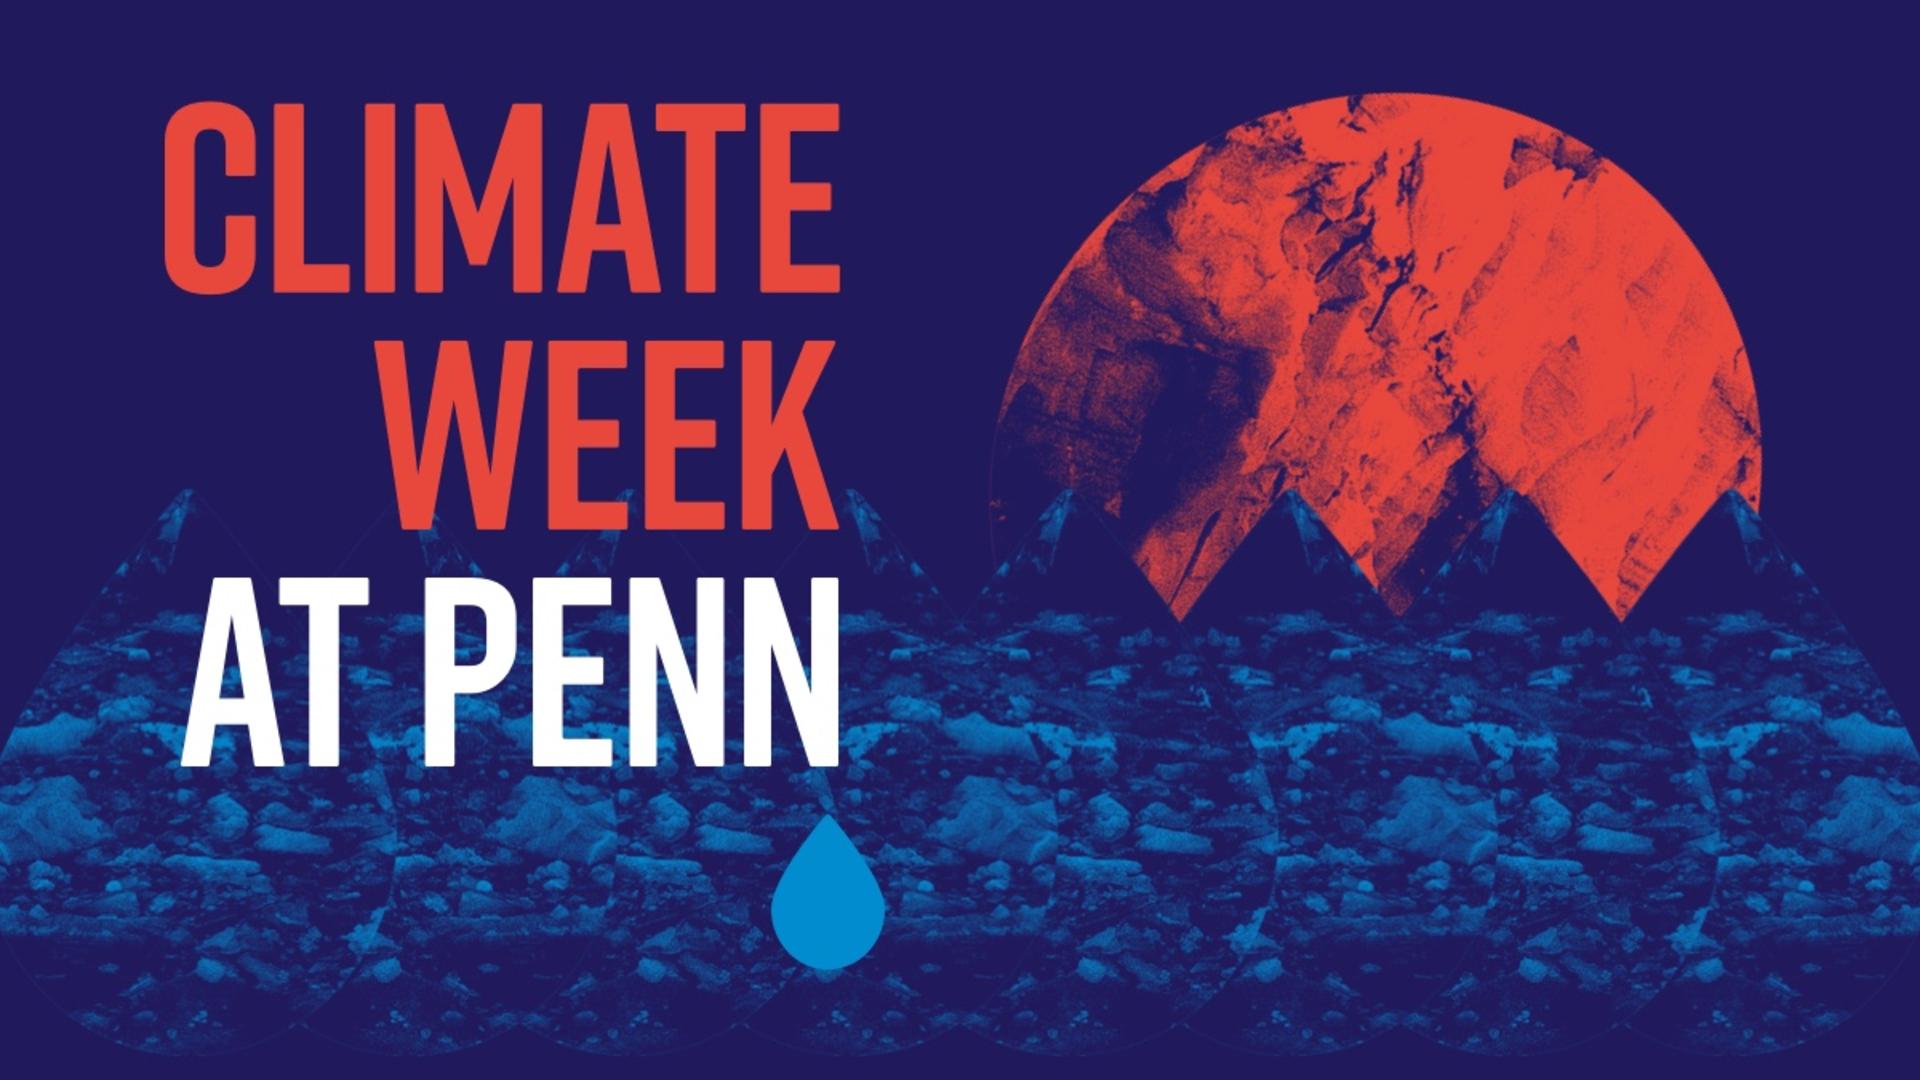 III. The Penn 1.5* Minute Climate Lectures